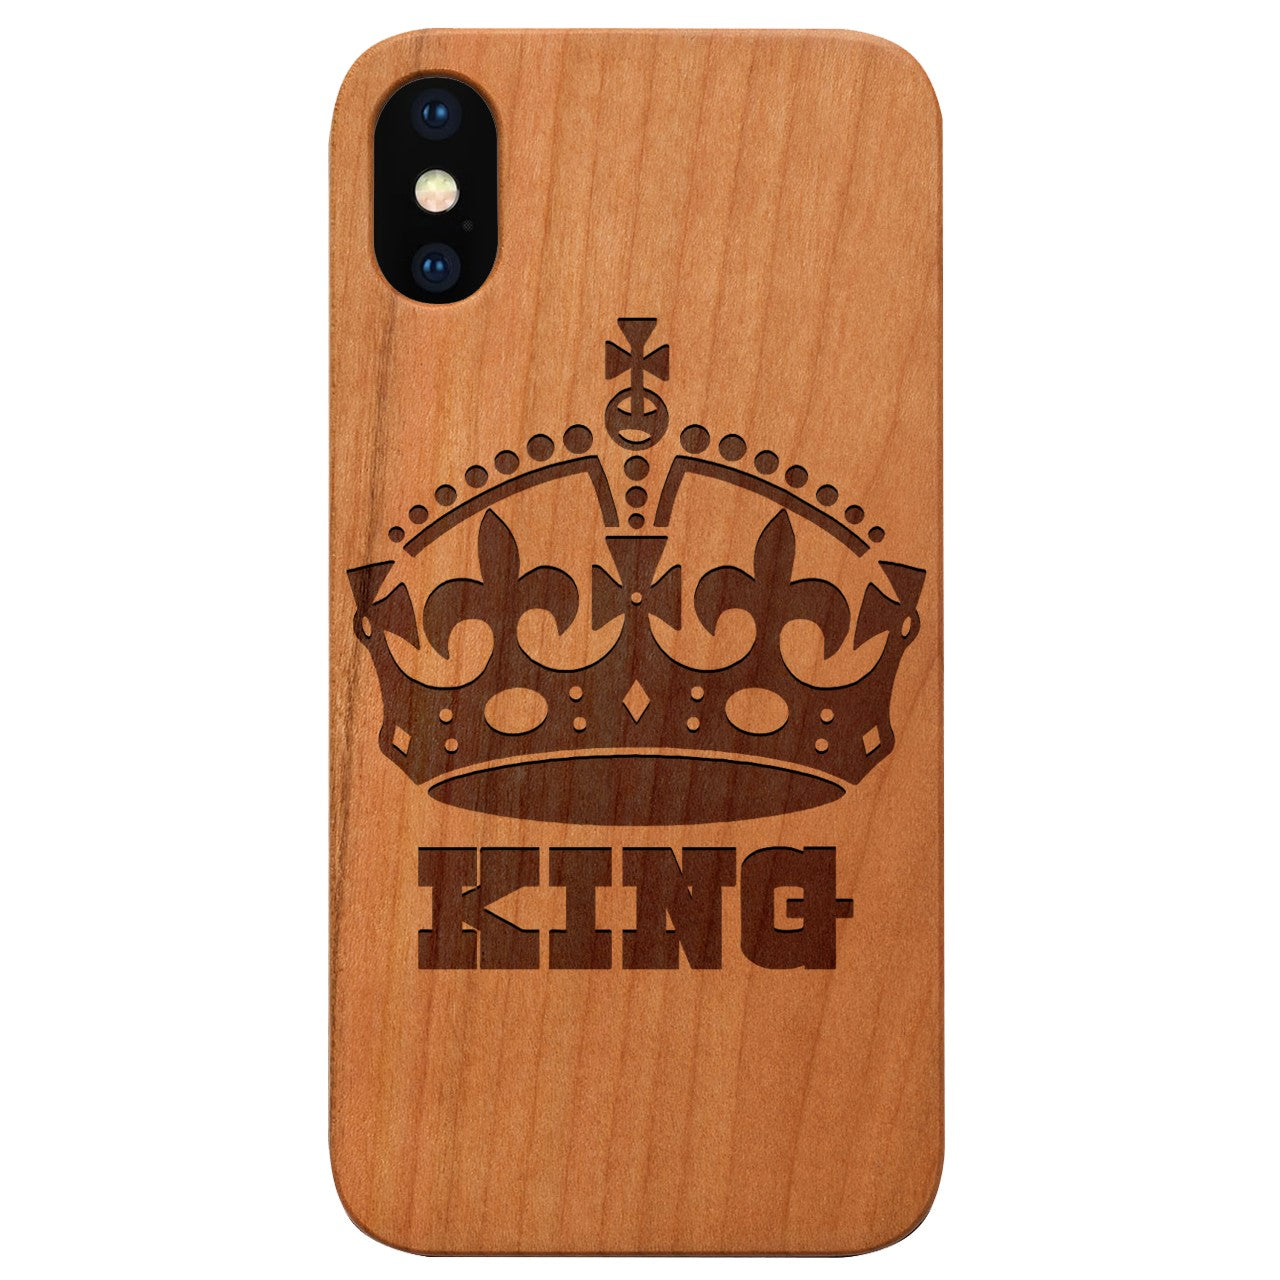  King - Engraved - Wooden Phone Case - IPhone 13 Models